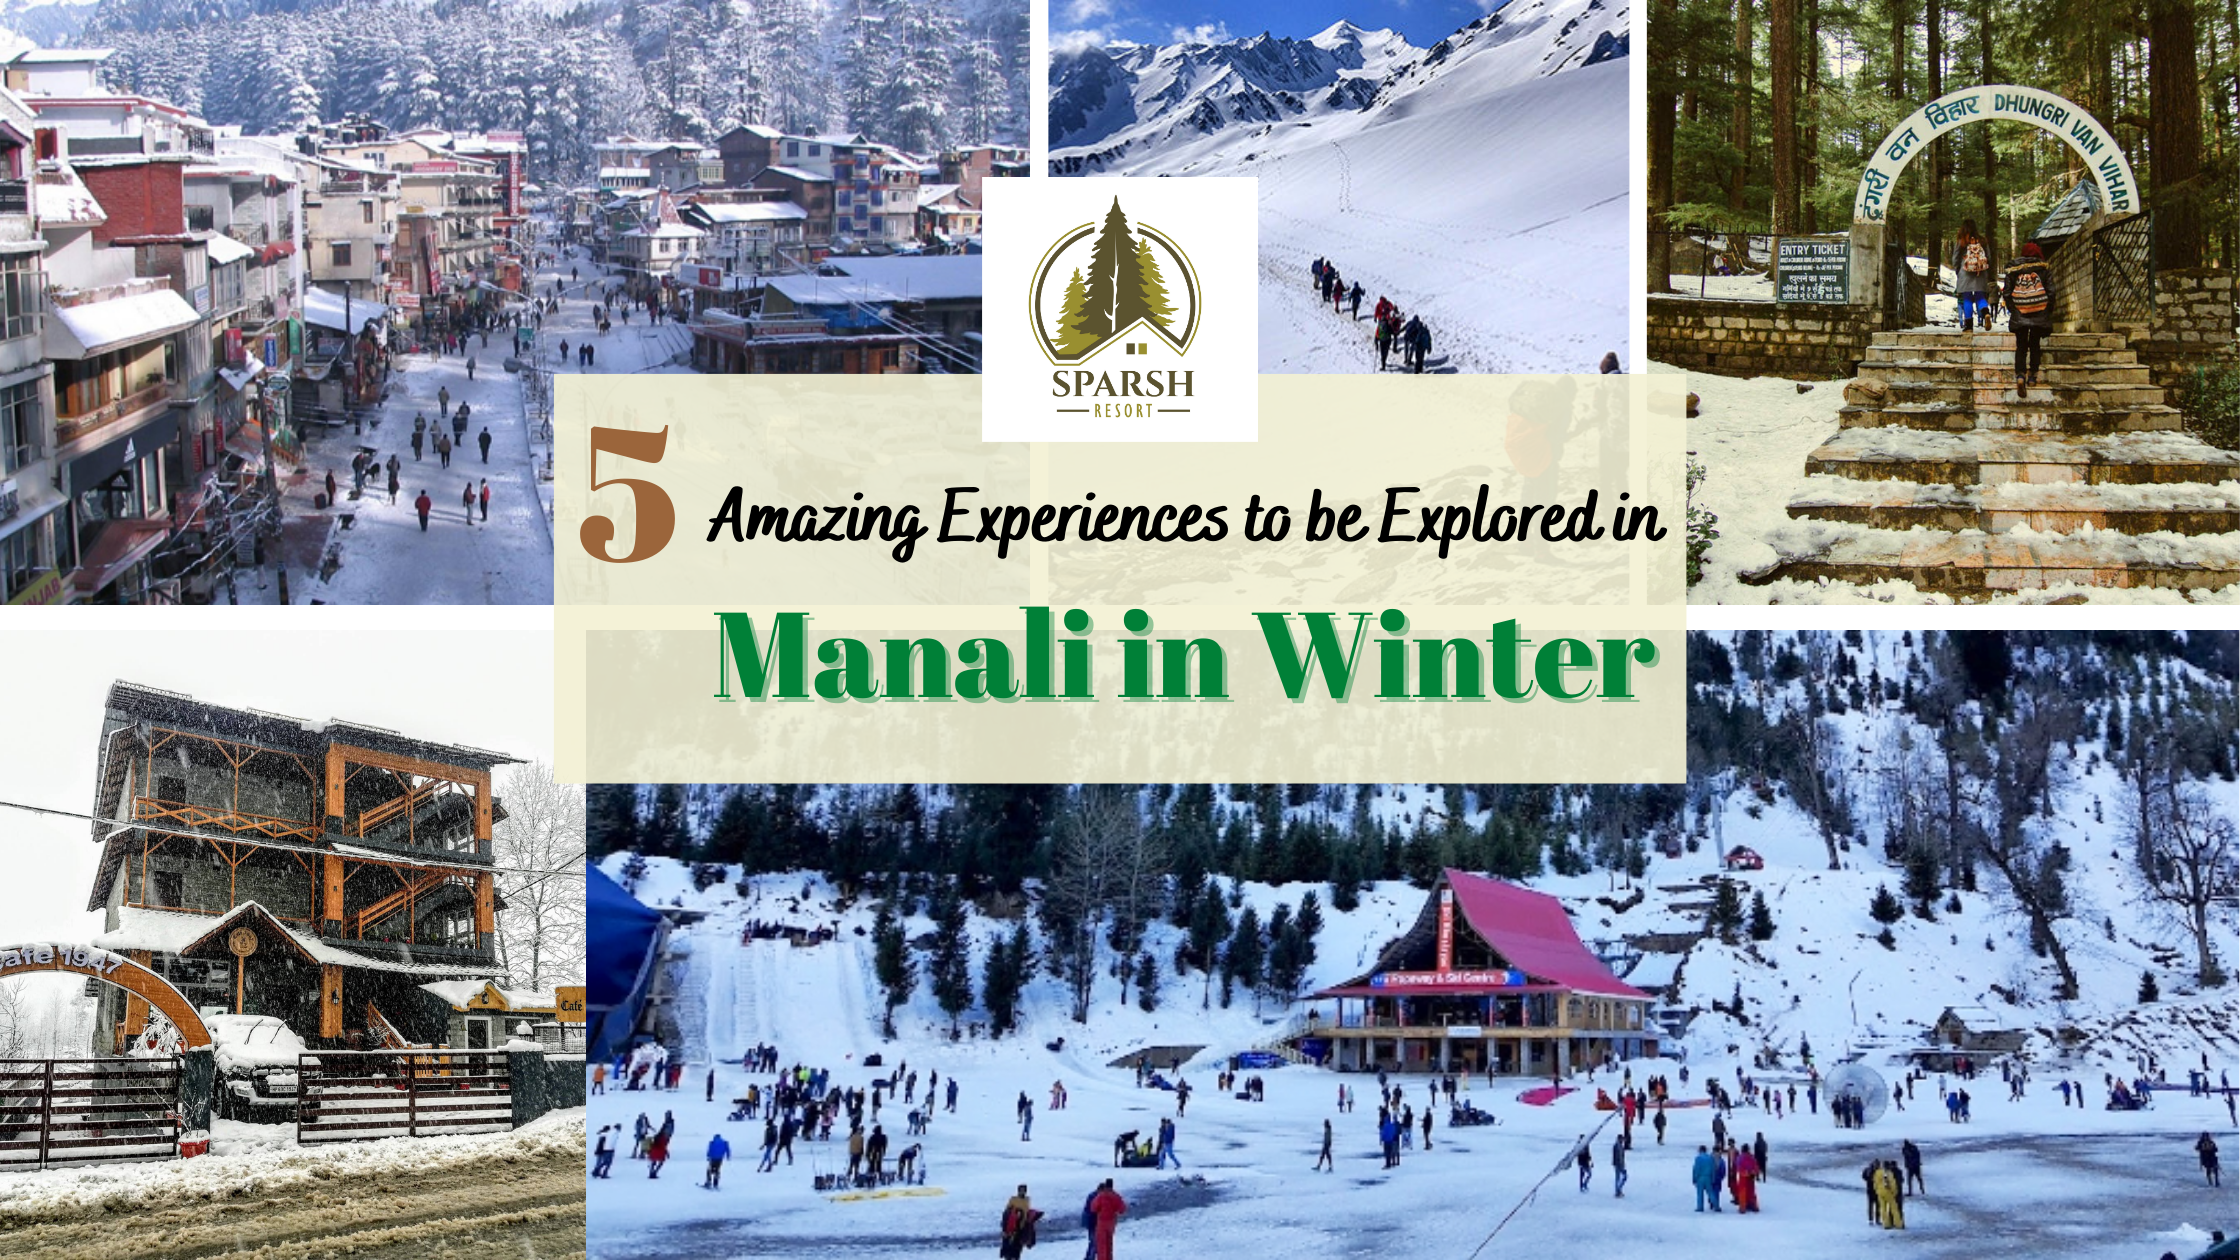 5 Amazing Experiences to be Explored in Manali in Winter - Sparsh Resort